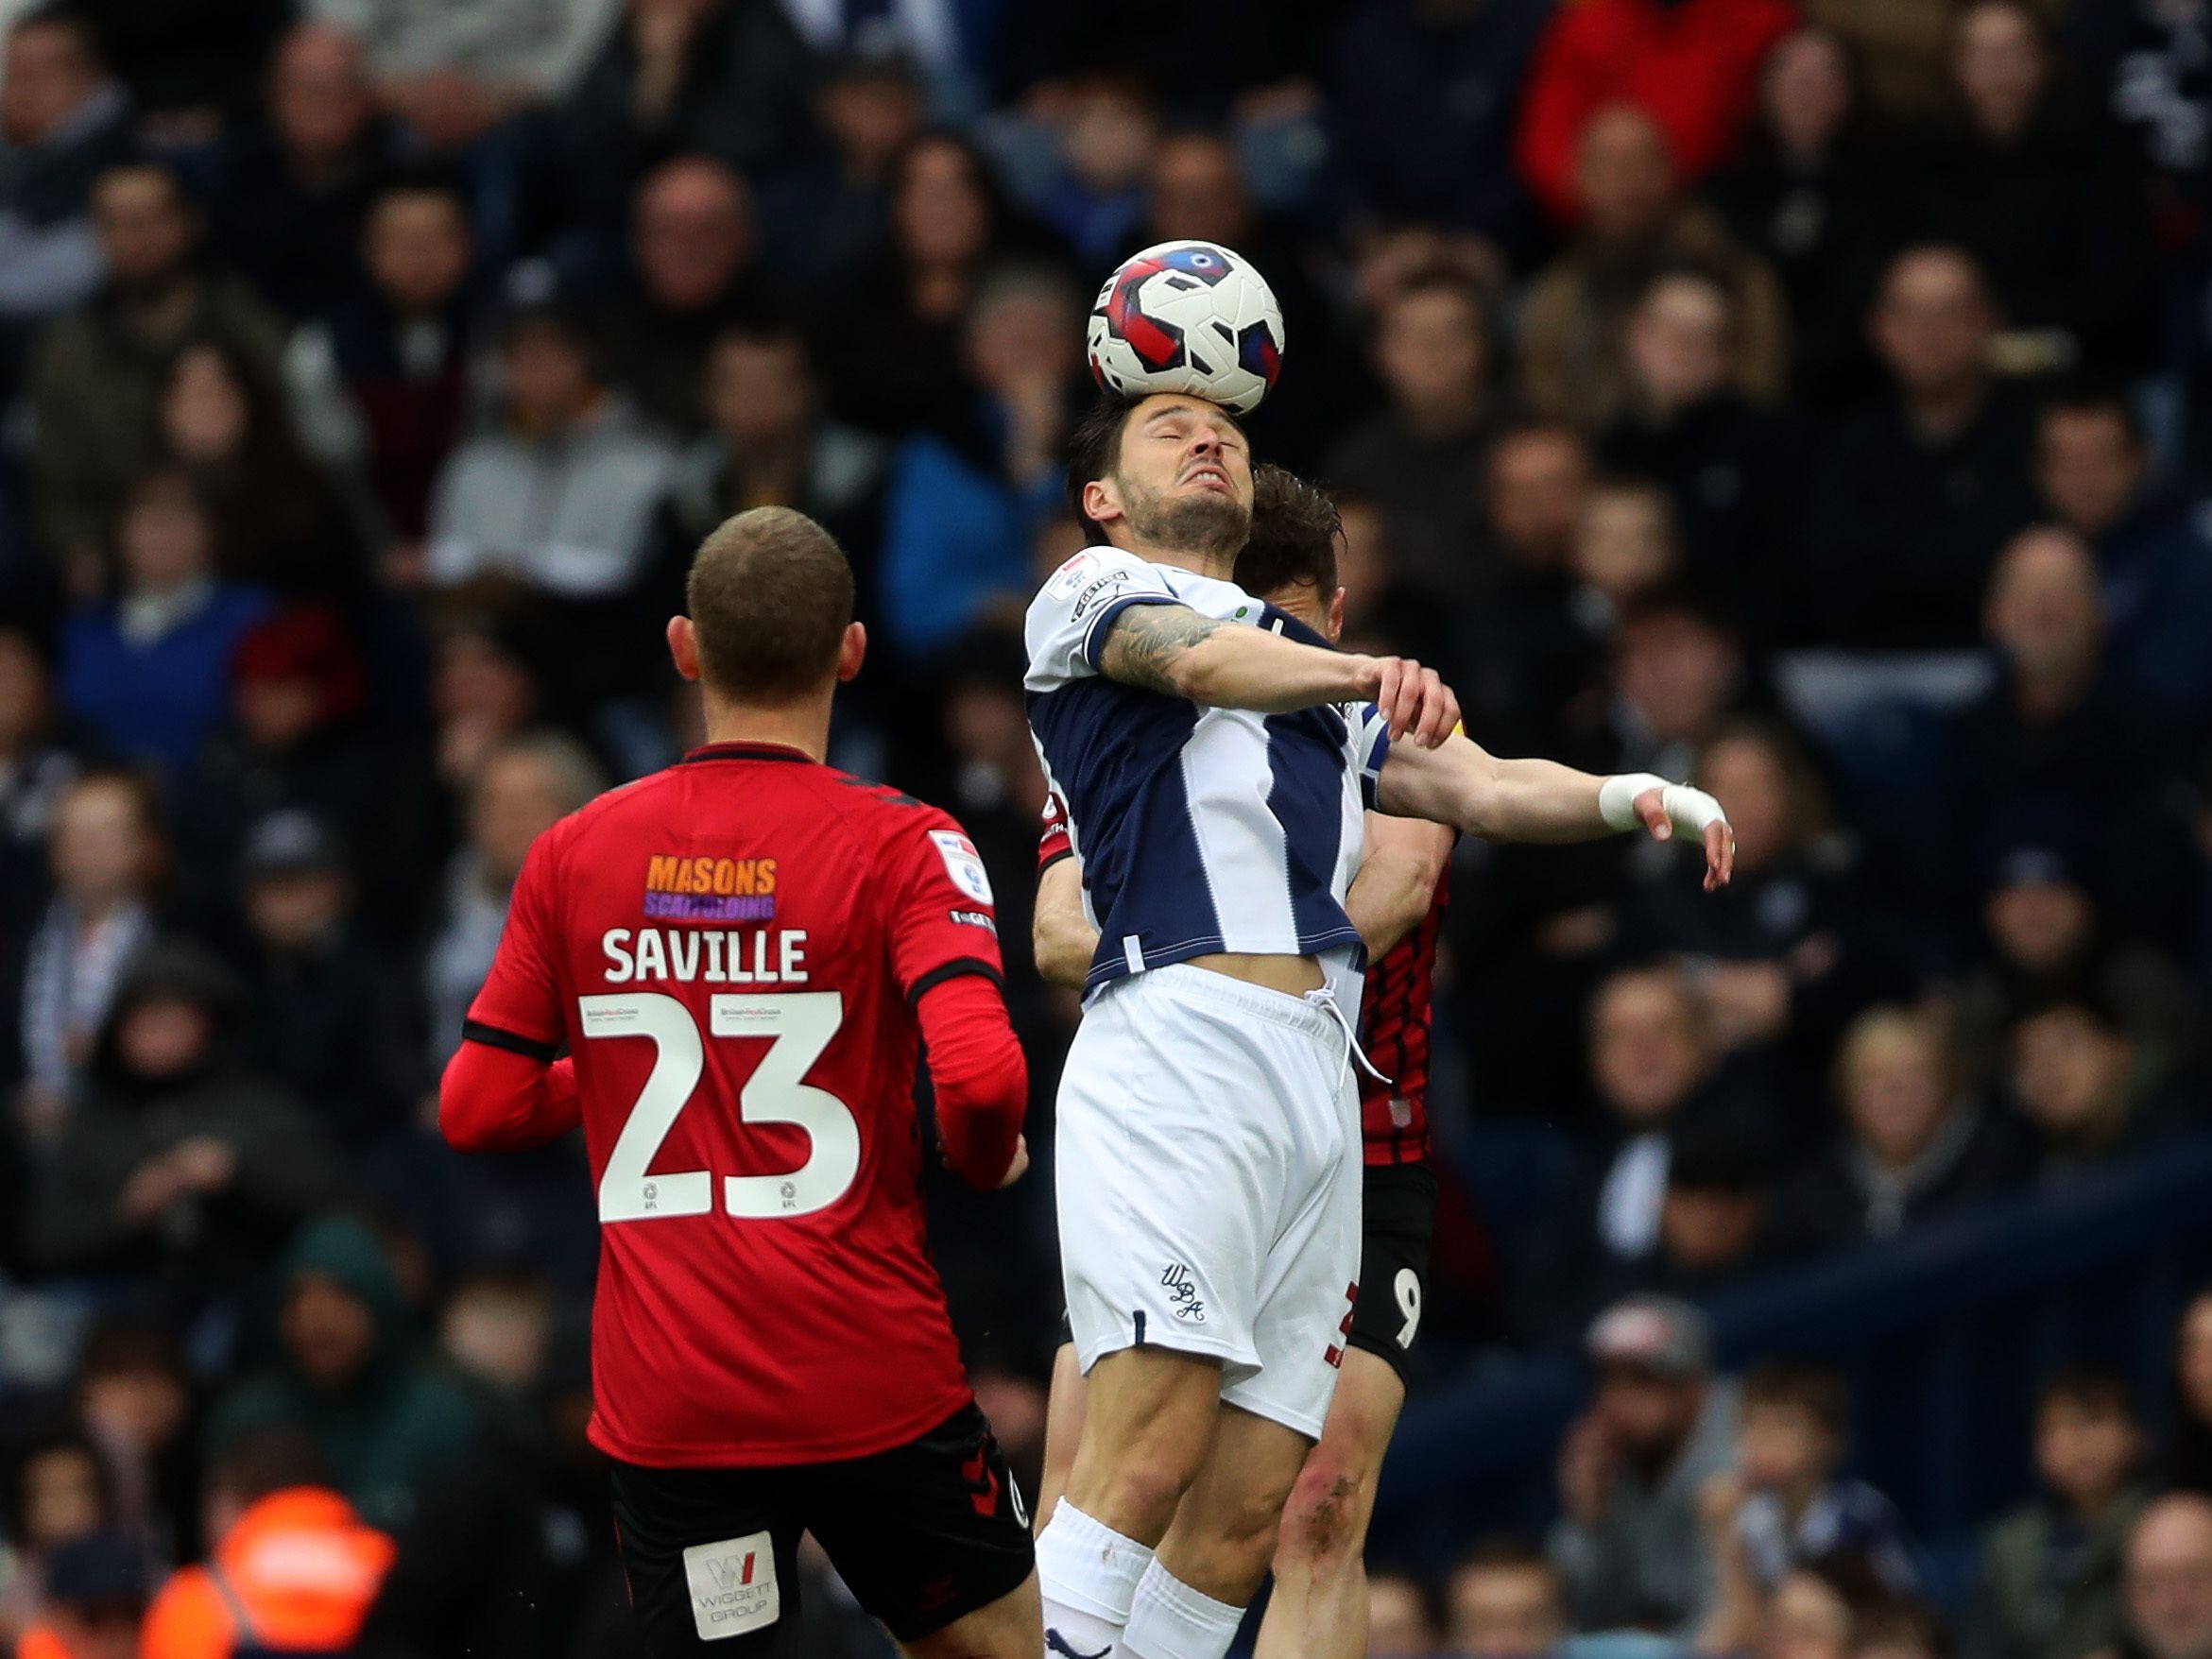 West Brom 0 Millwall 0 - Report